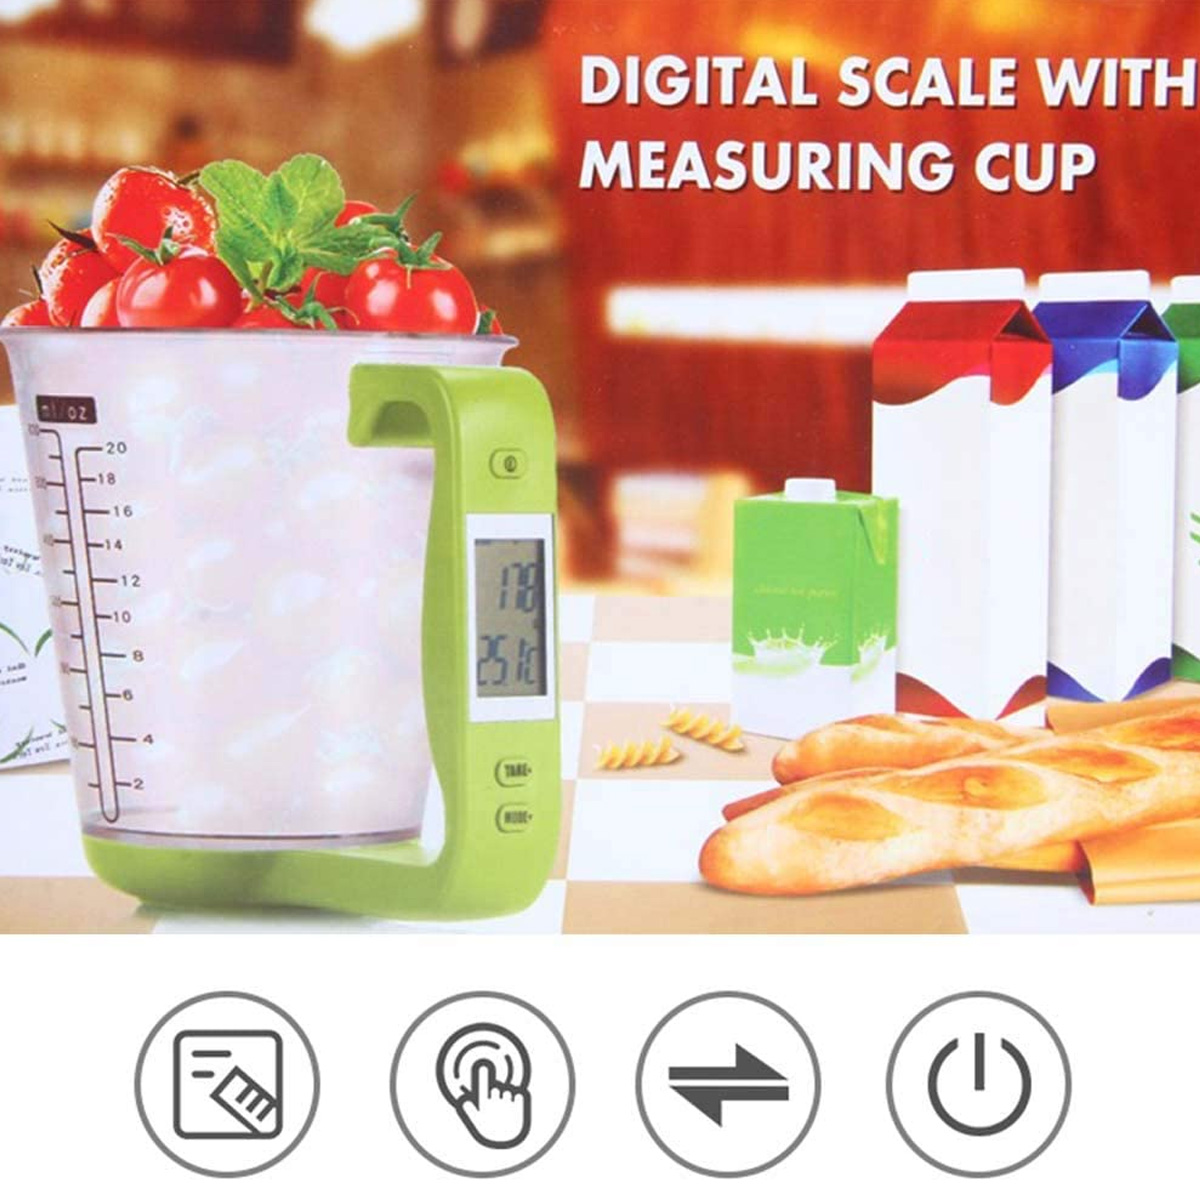 Electronic-Scale-Measuring-Cup-Auto-Power-Off-Electronic-Scale-Large-Capacity-LCD-Digital-Measuring--86136-1